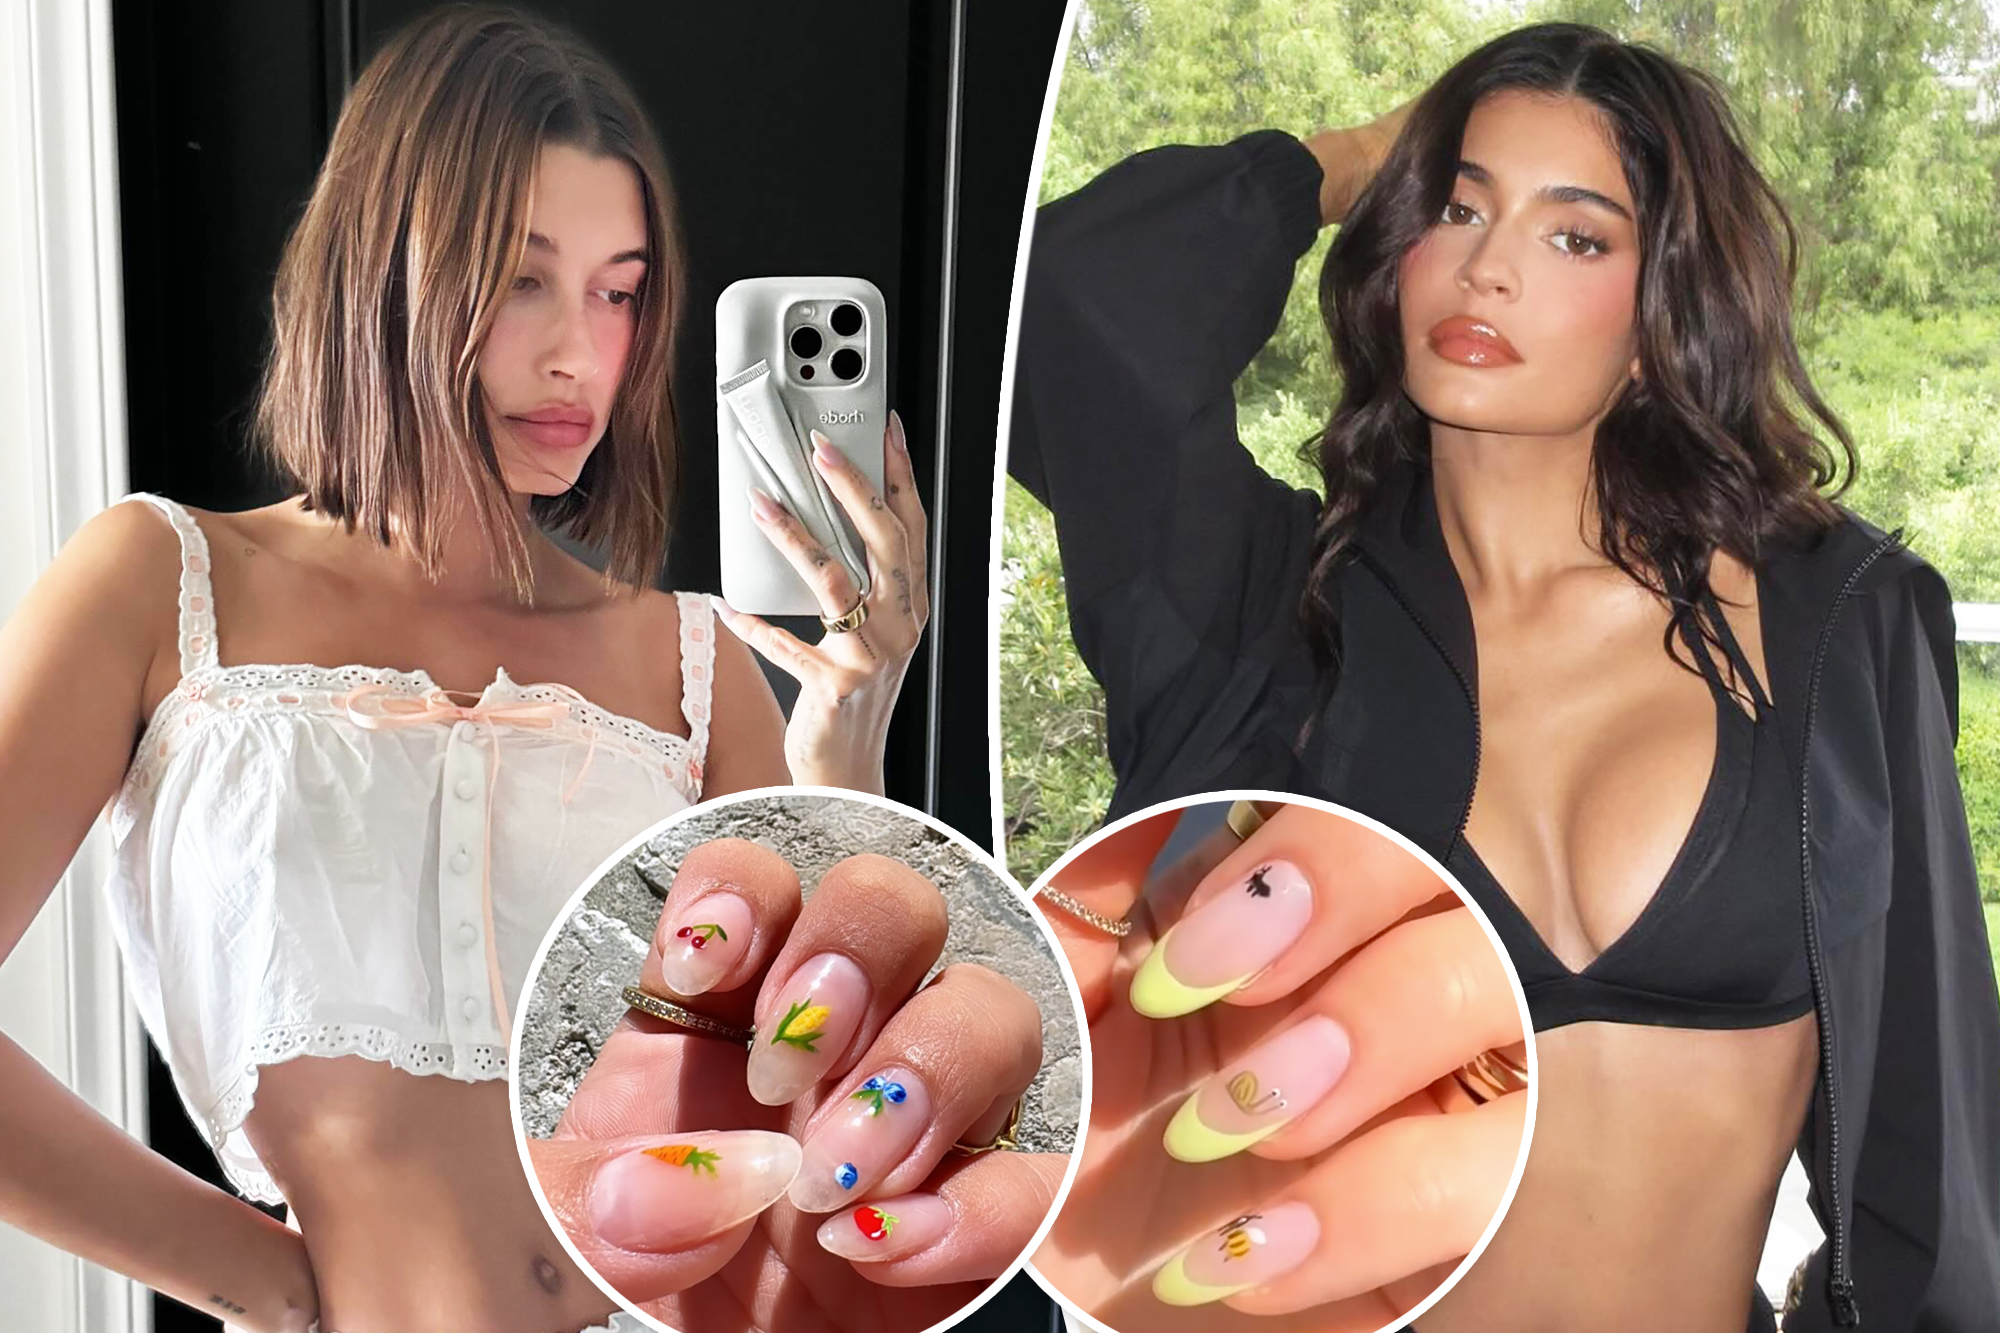 Get Ready for Summer BBQs with Hailey Bieber and Kylie Jenner's Fun Nail Art